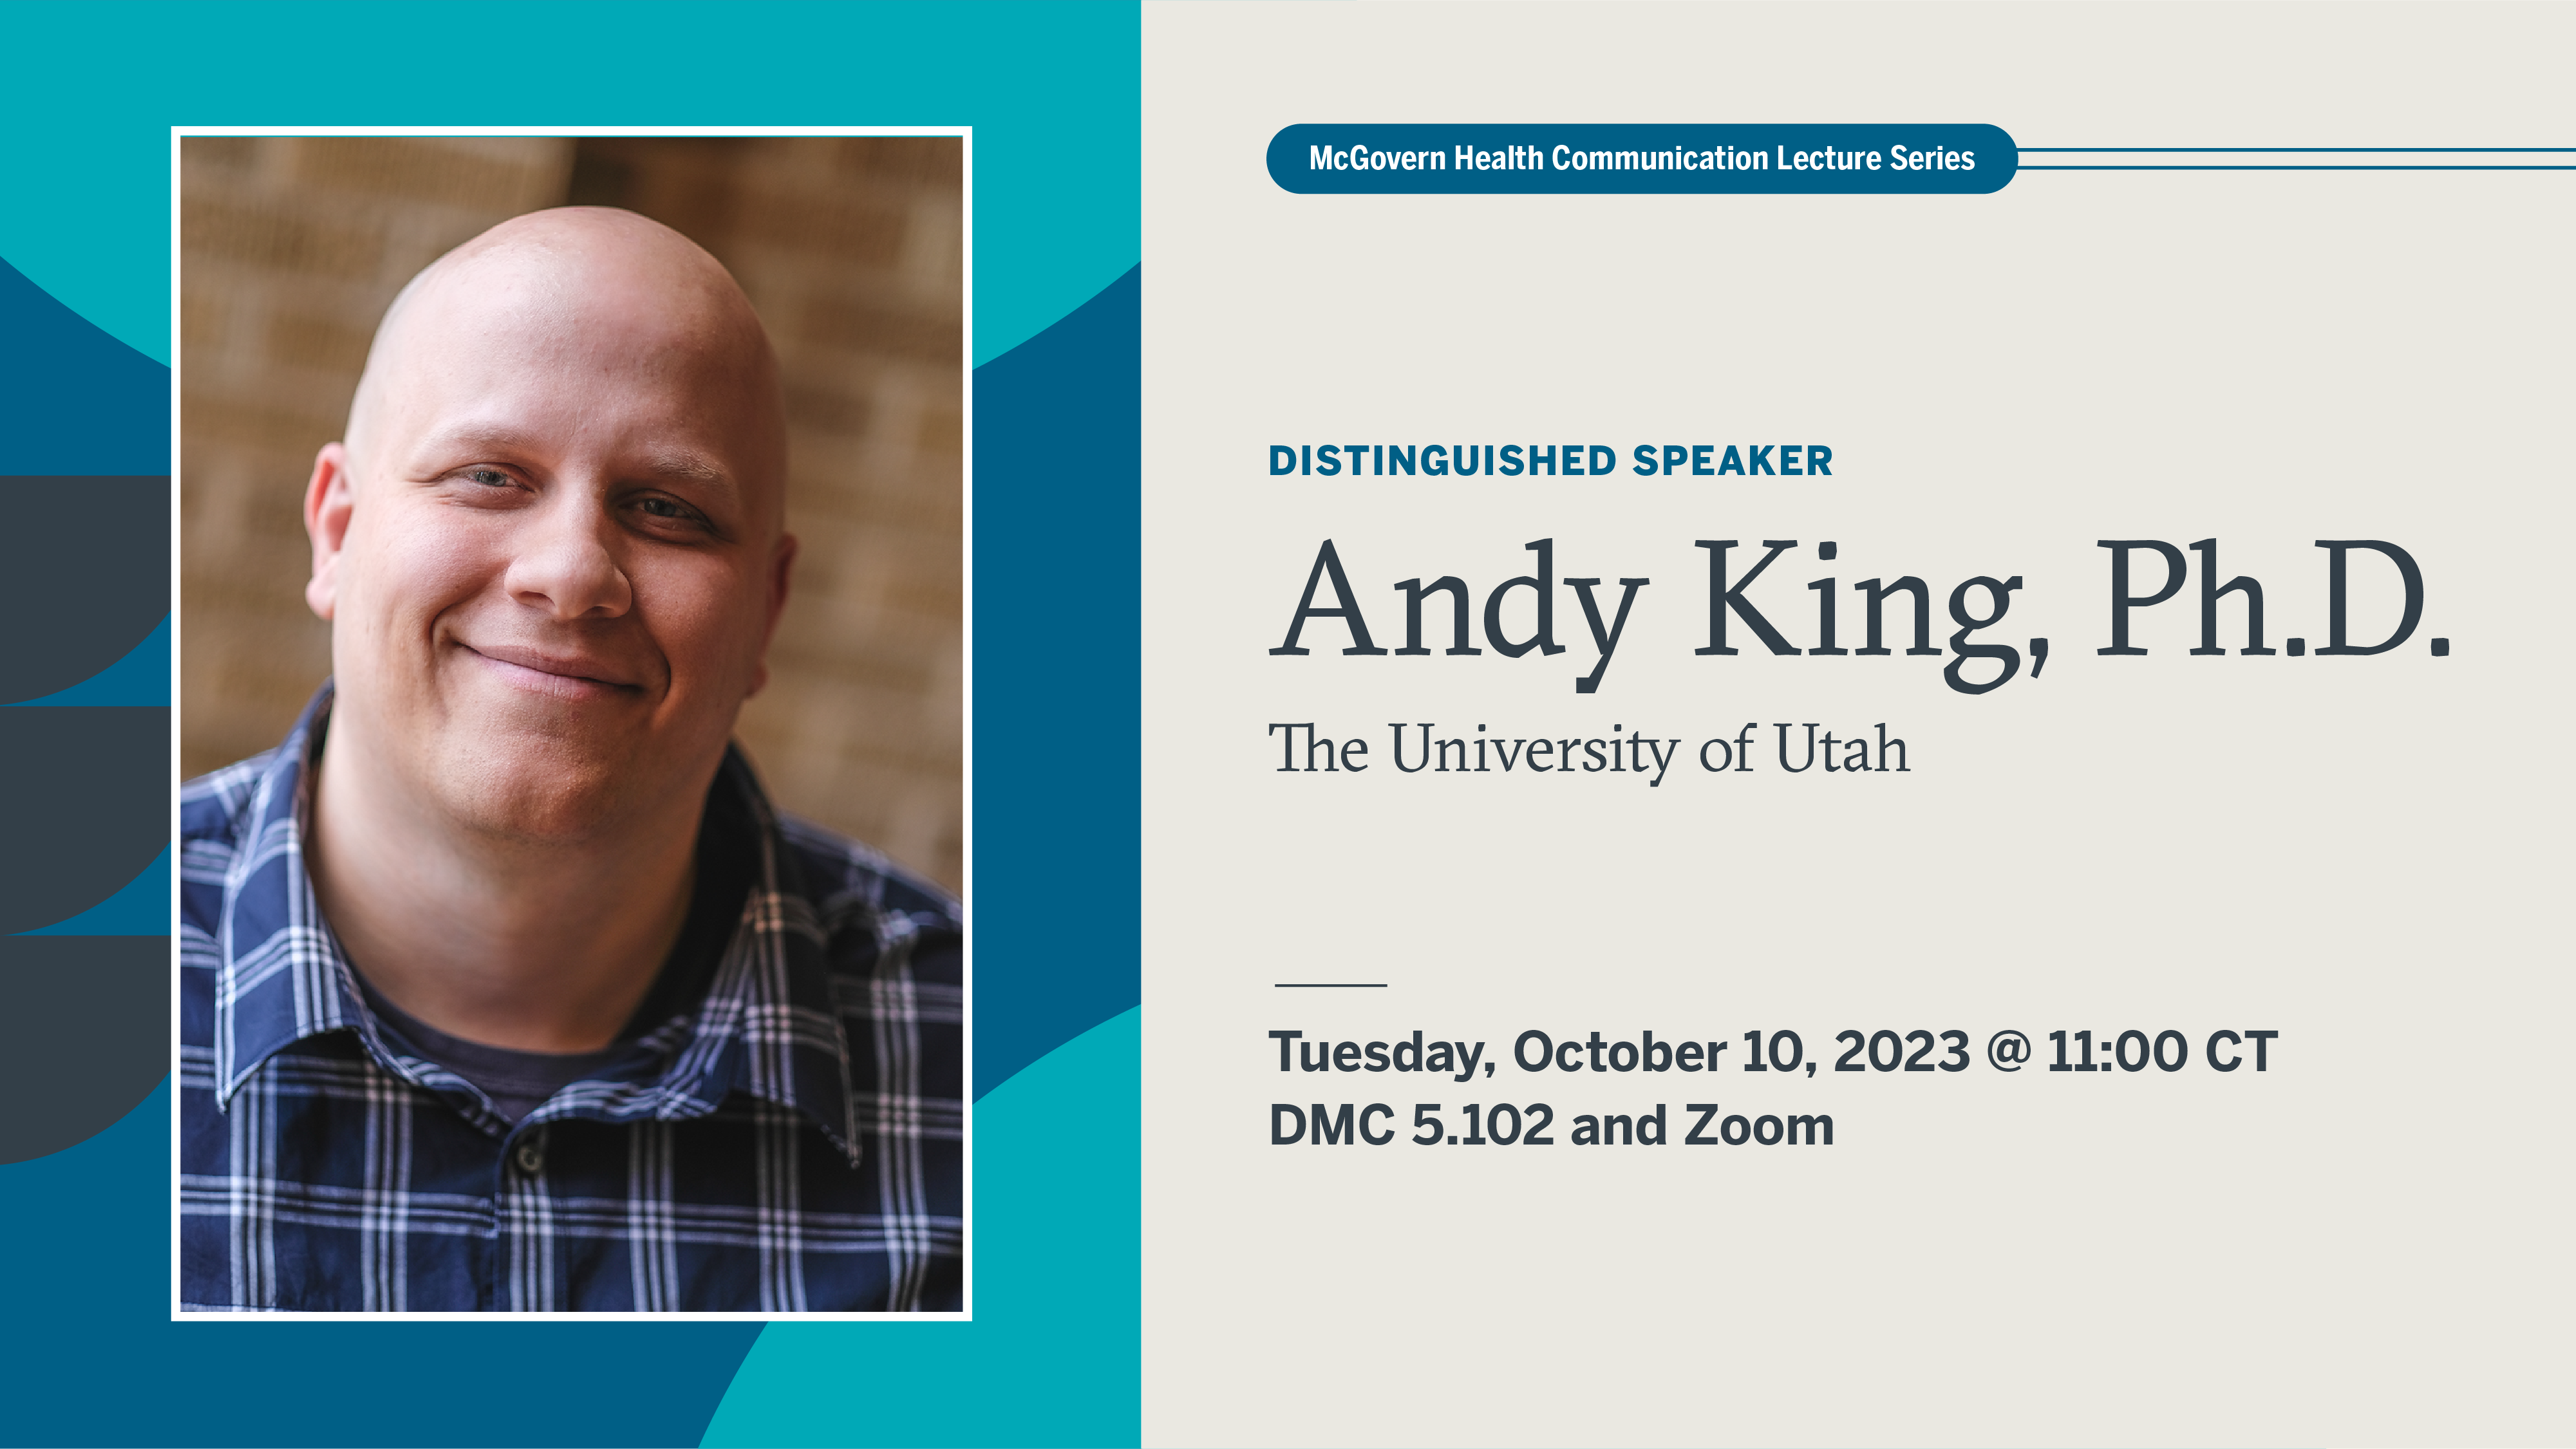 Graphic with a headshot of Andy King, Ph.D., a white, bald man, in a plaid shirt smiling at the camera on the left side. The right side of the graphic reads McGovern Health Communication Lecture Series, Distinguished Speaker Andy King Ph.D., The University of Utah. Tuesday, October 10, 2023 at 11:00 CT. DMC 5.102 and Zoom.